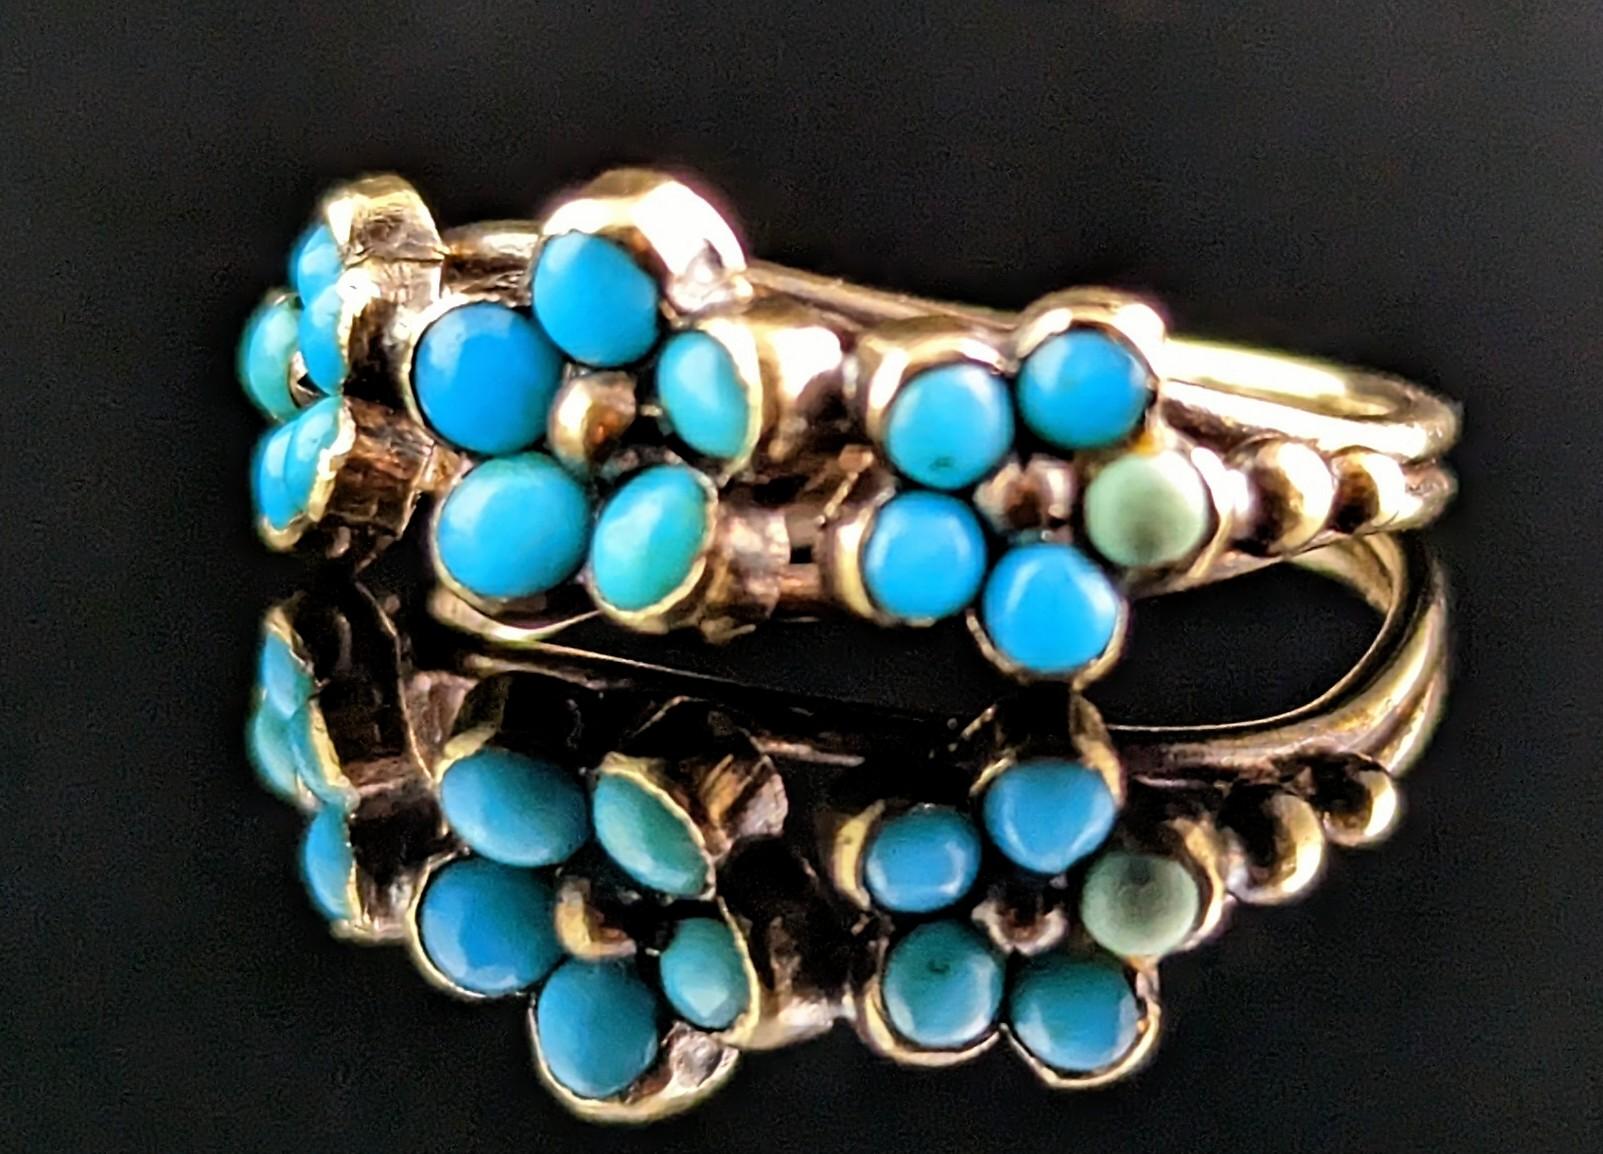 Women's Antique Georgian Triple Flower Ring, Forget Me Not, 18k Gold and Turquoise